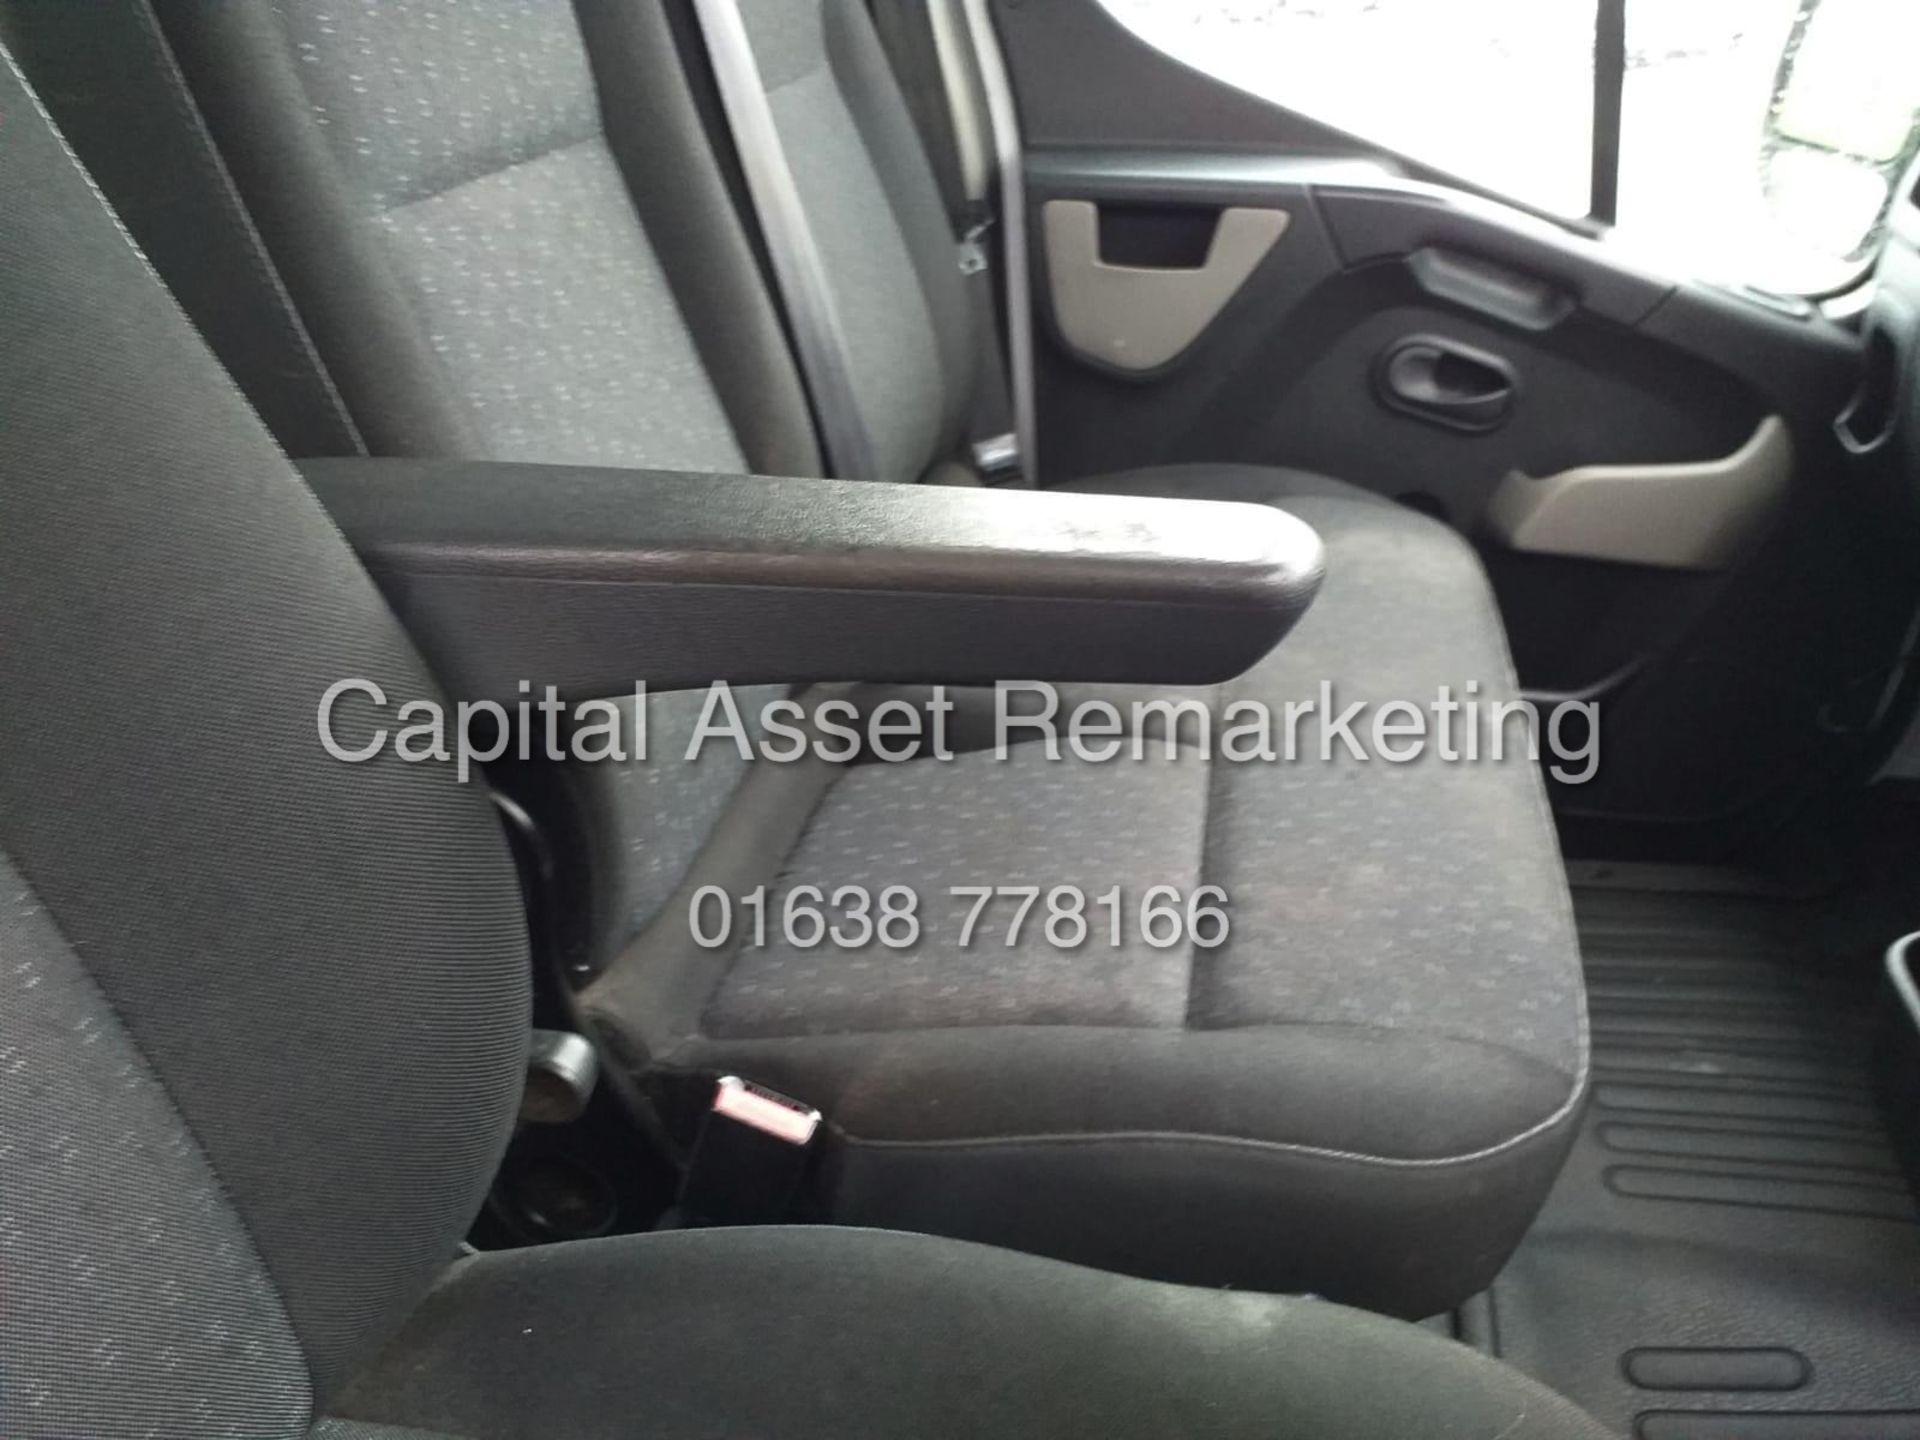 RENAULT MASTER 2.3CDTI "136BHP - 6 SPEED" 15FT LOW-LOADER BODY (2015 MODEL) IDEAL REMOVALS TRUCK - Image 7 of 14